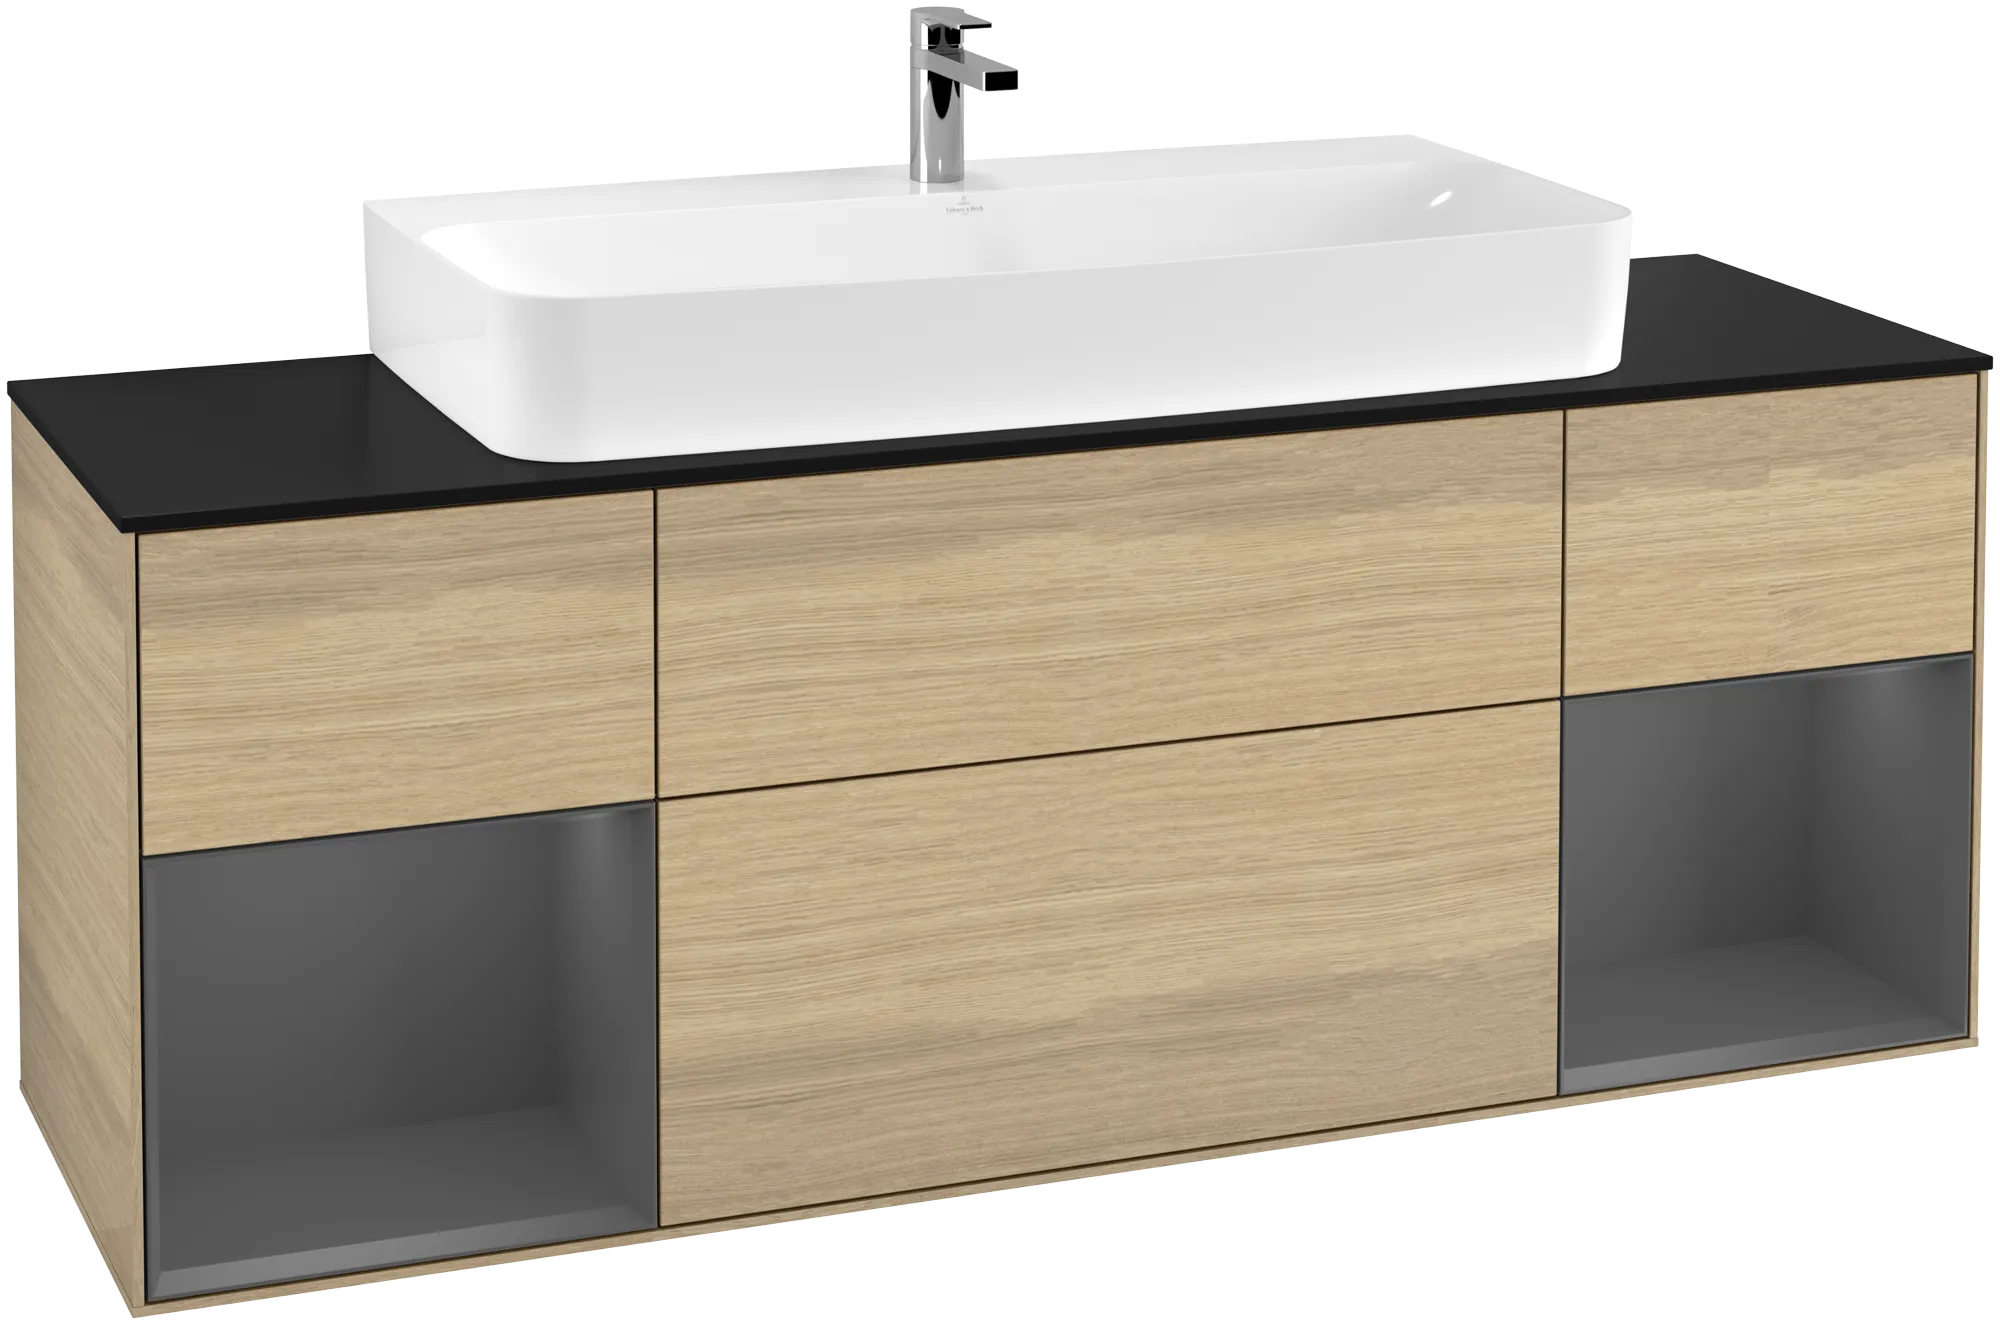 Picture of VILLEROY BOCH Finion Vanity unit, with lighting, 4 pull-out compartments, 1600 x 603 x 501 mm, Oak Veneer / Anthracite Matt Lacquer / Glass Black Matt #G212GKPC